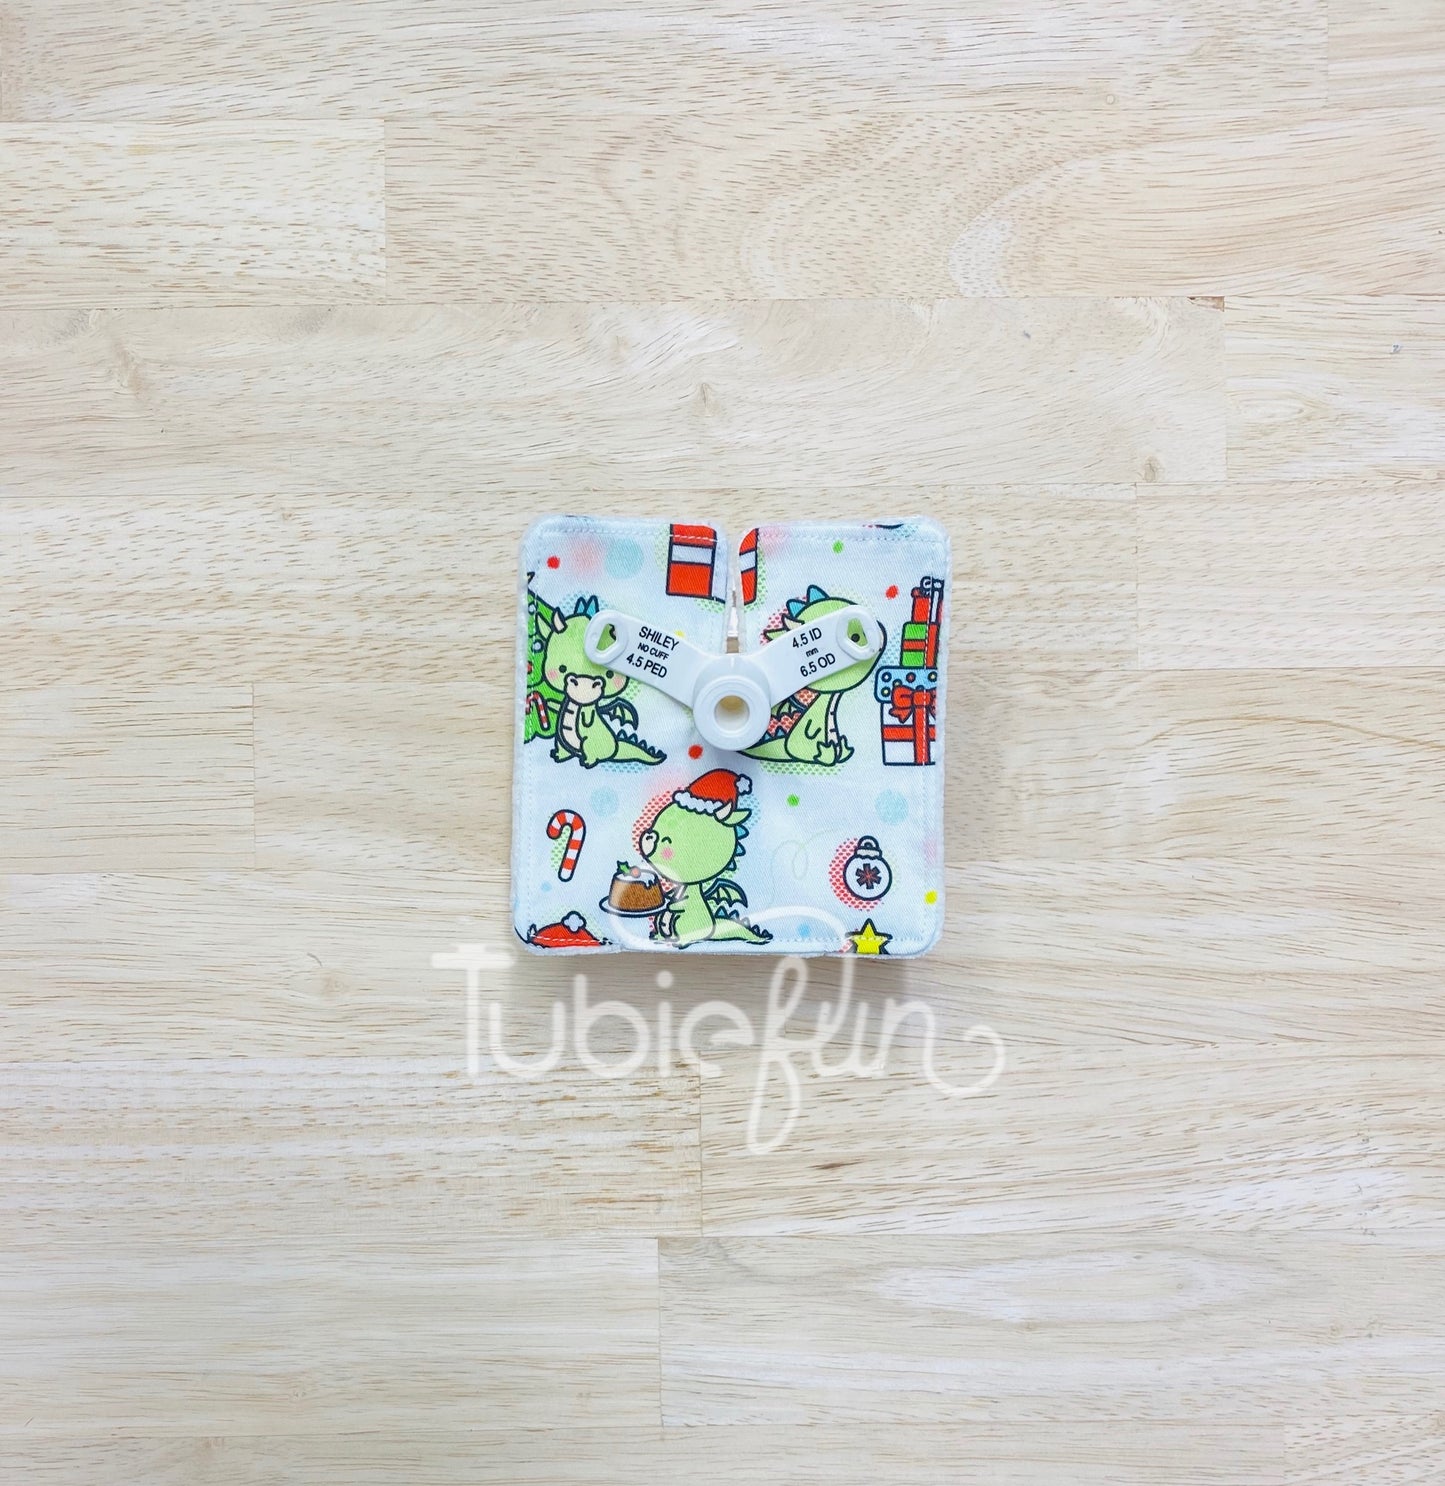 Tracheostomy Pad Cover - Christmas Dinosaurs with Trees